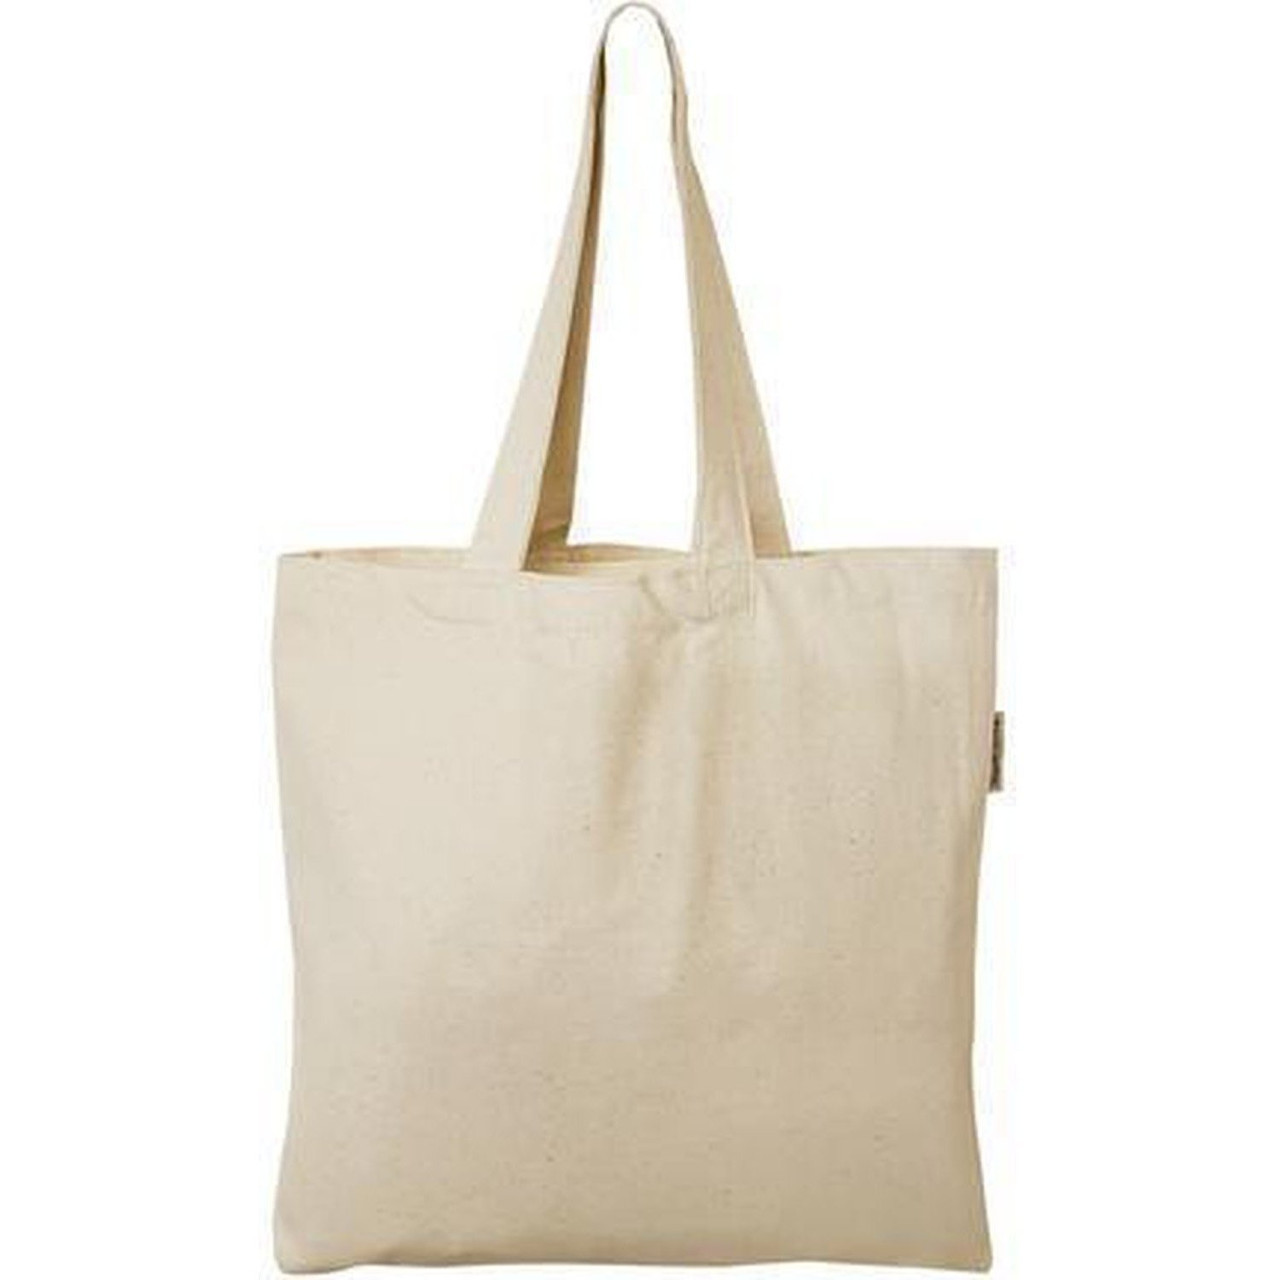 Where can I get wholesale canvas bags? - Quora